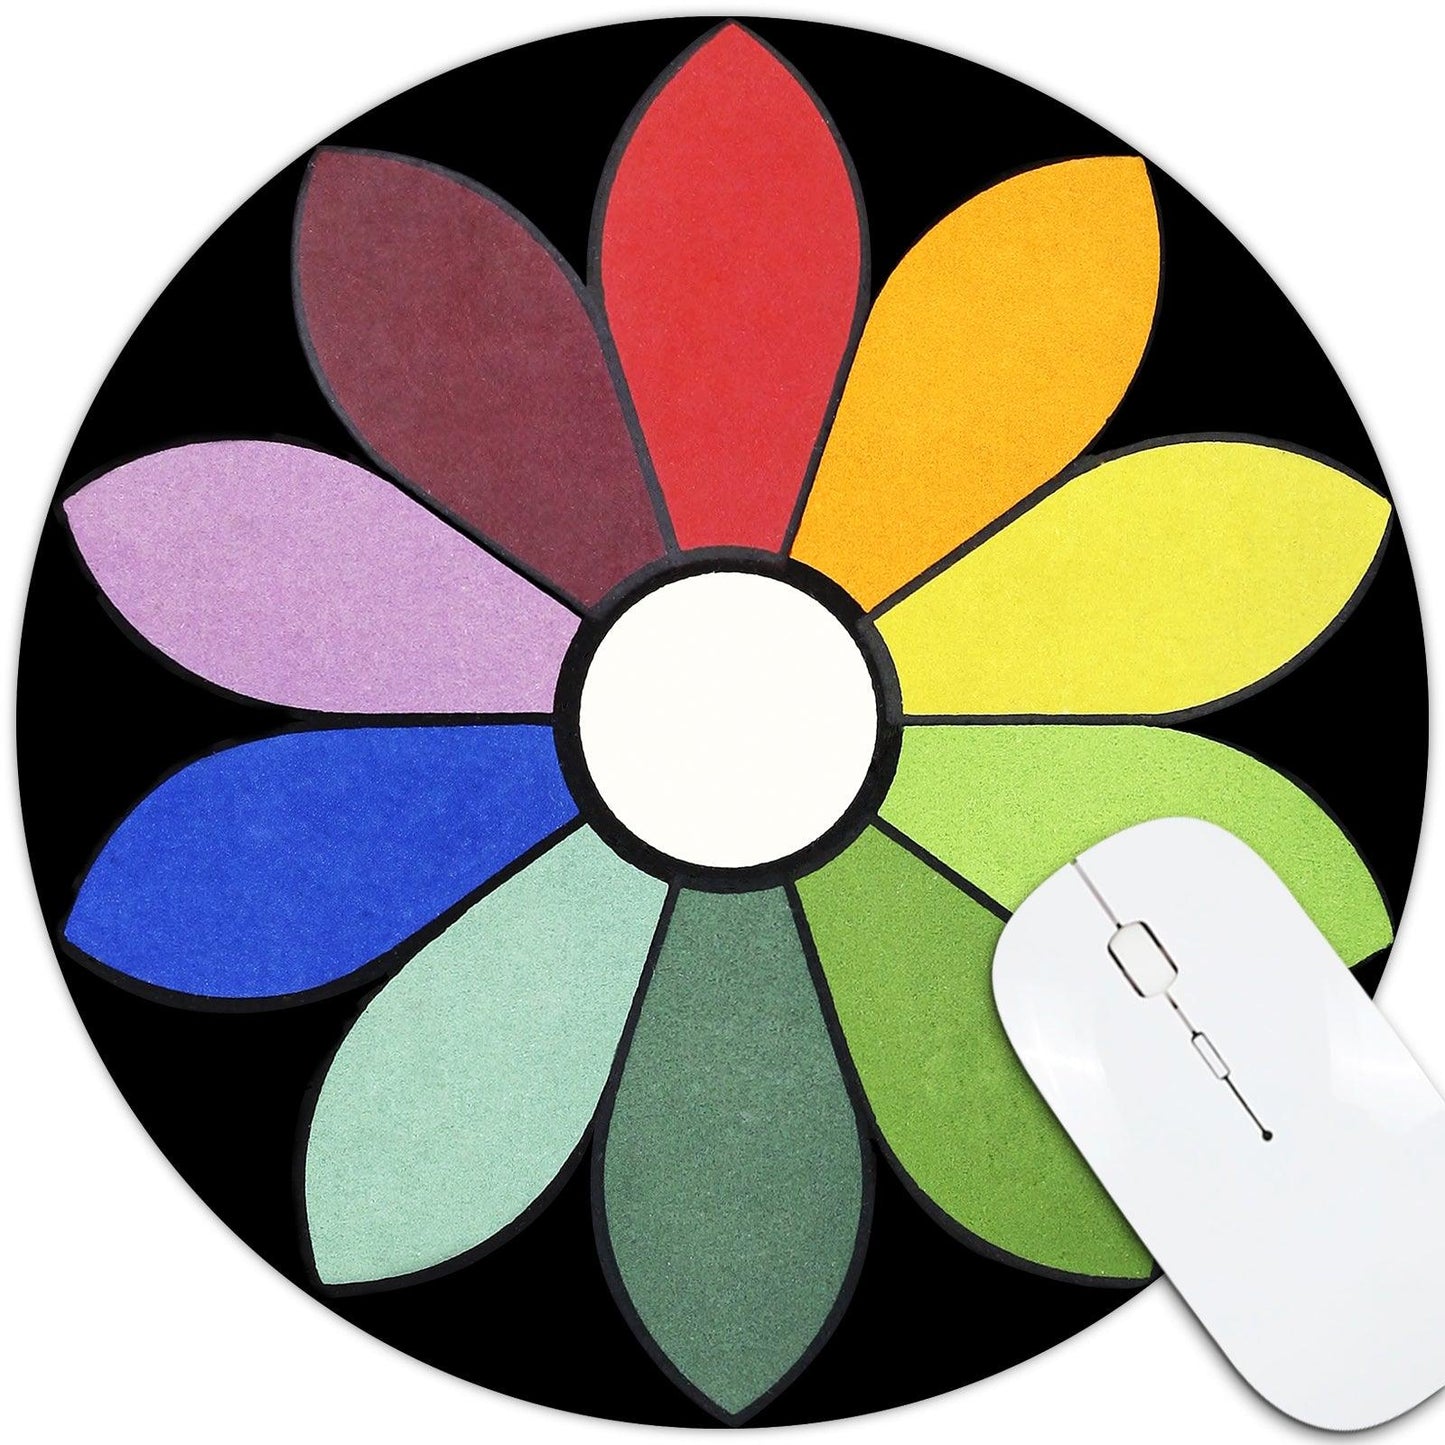 Art Round Mouse Pad 7.9 x 7.9 Inches (Chromatic Circle by James Ward) - Berkin Arts